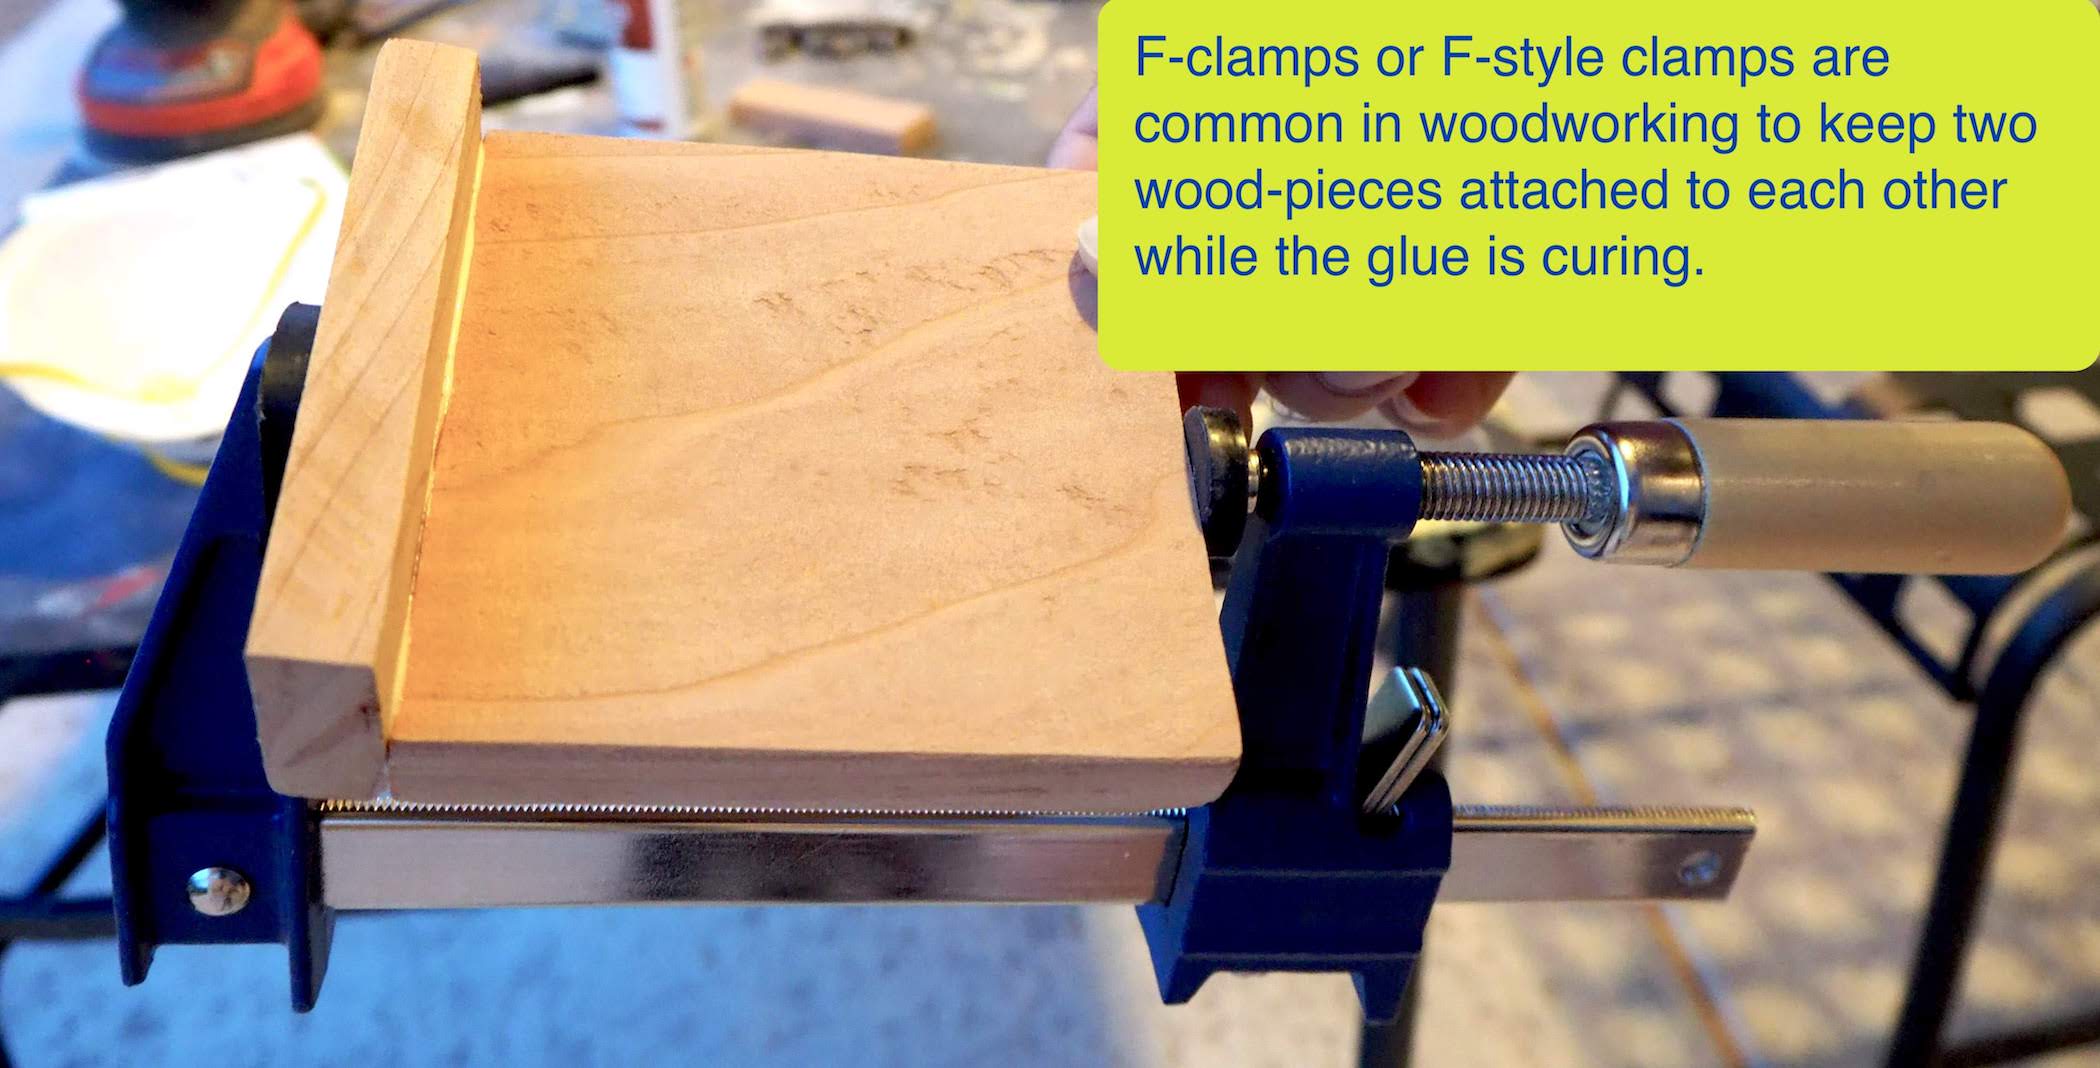 F-style clamps help keeping the wood boards together while being cured.